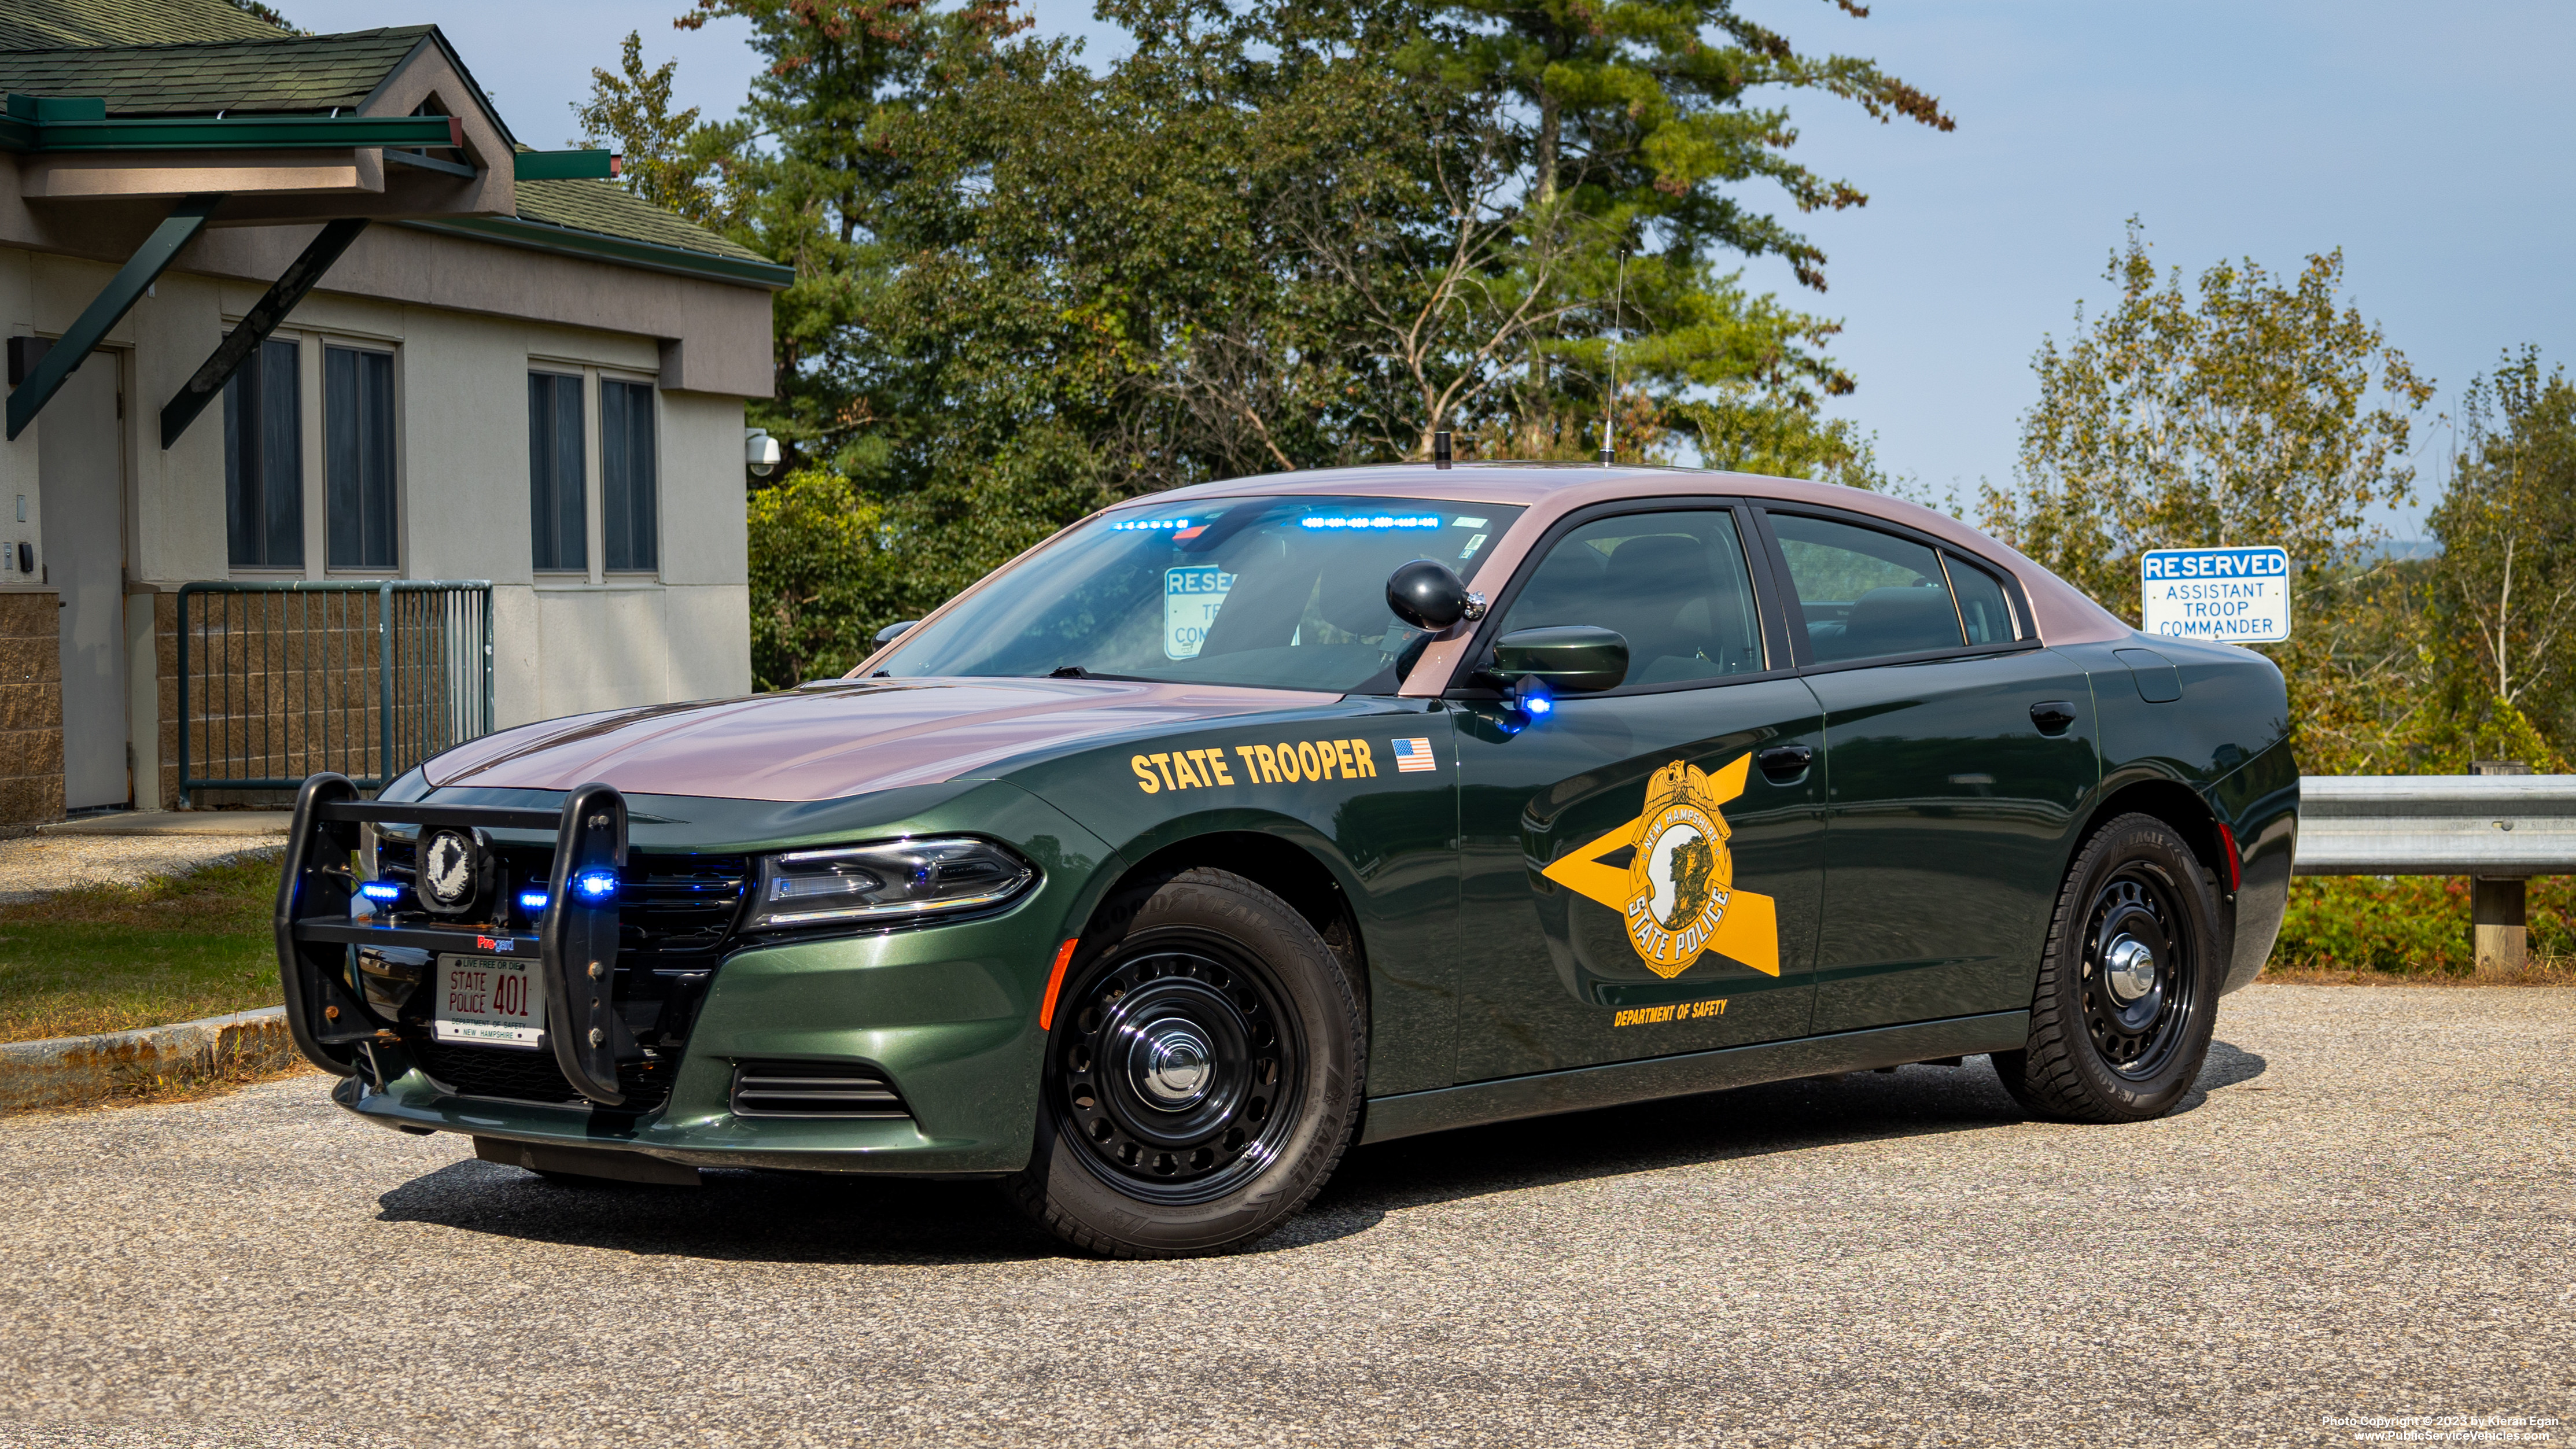 A photo  of New Hampshire State Police
            Cruiser 401, a 2016 Dodge Charger             taken by Kieran Egan